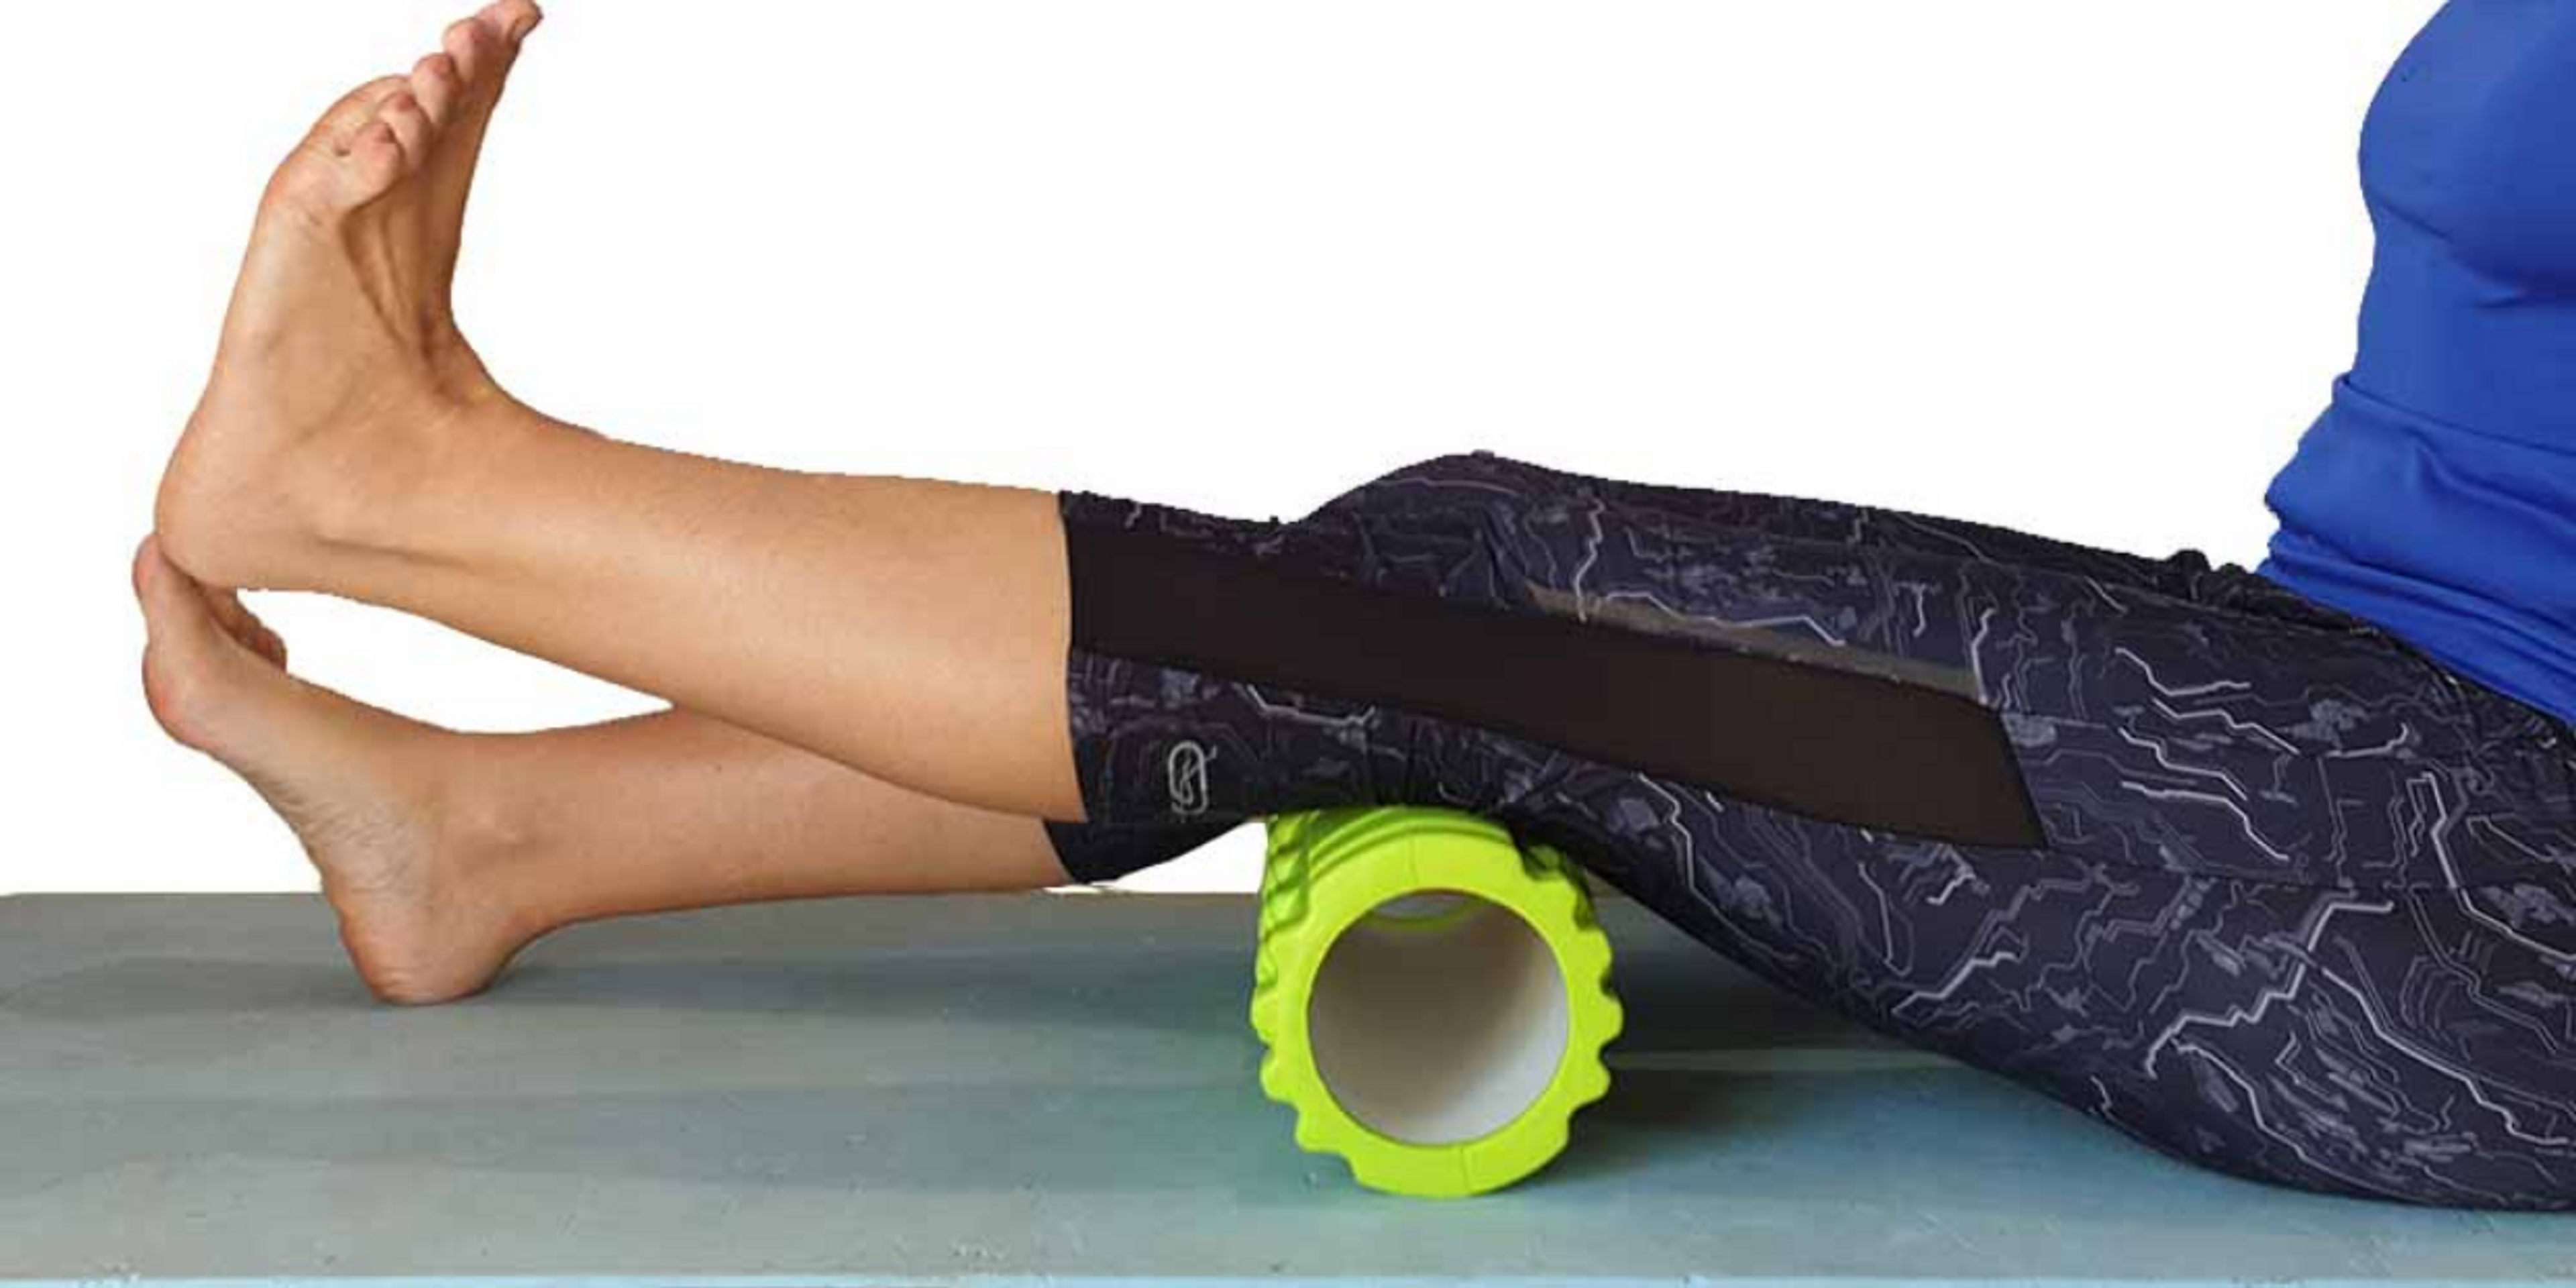 Knee extension exercise for sprained knee